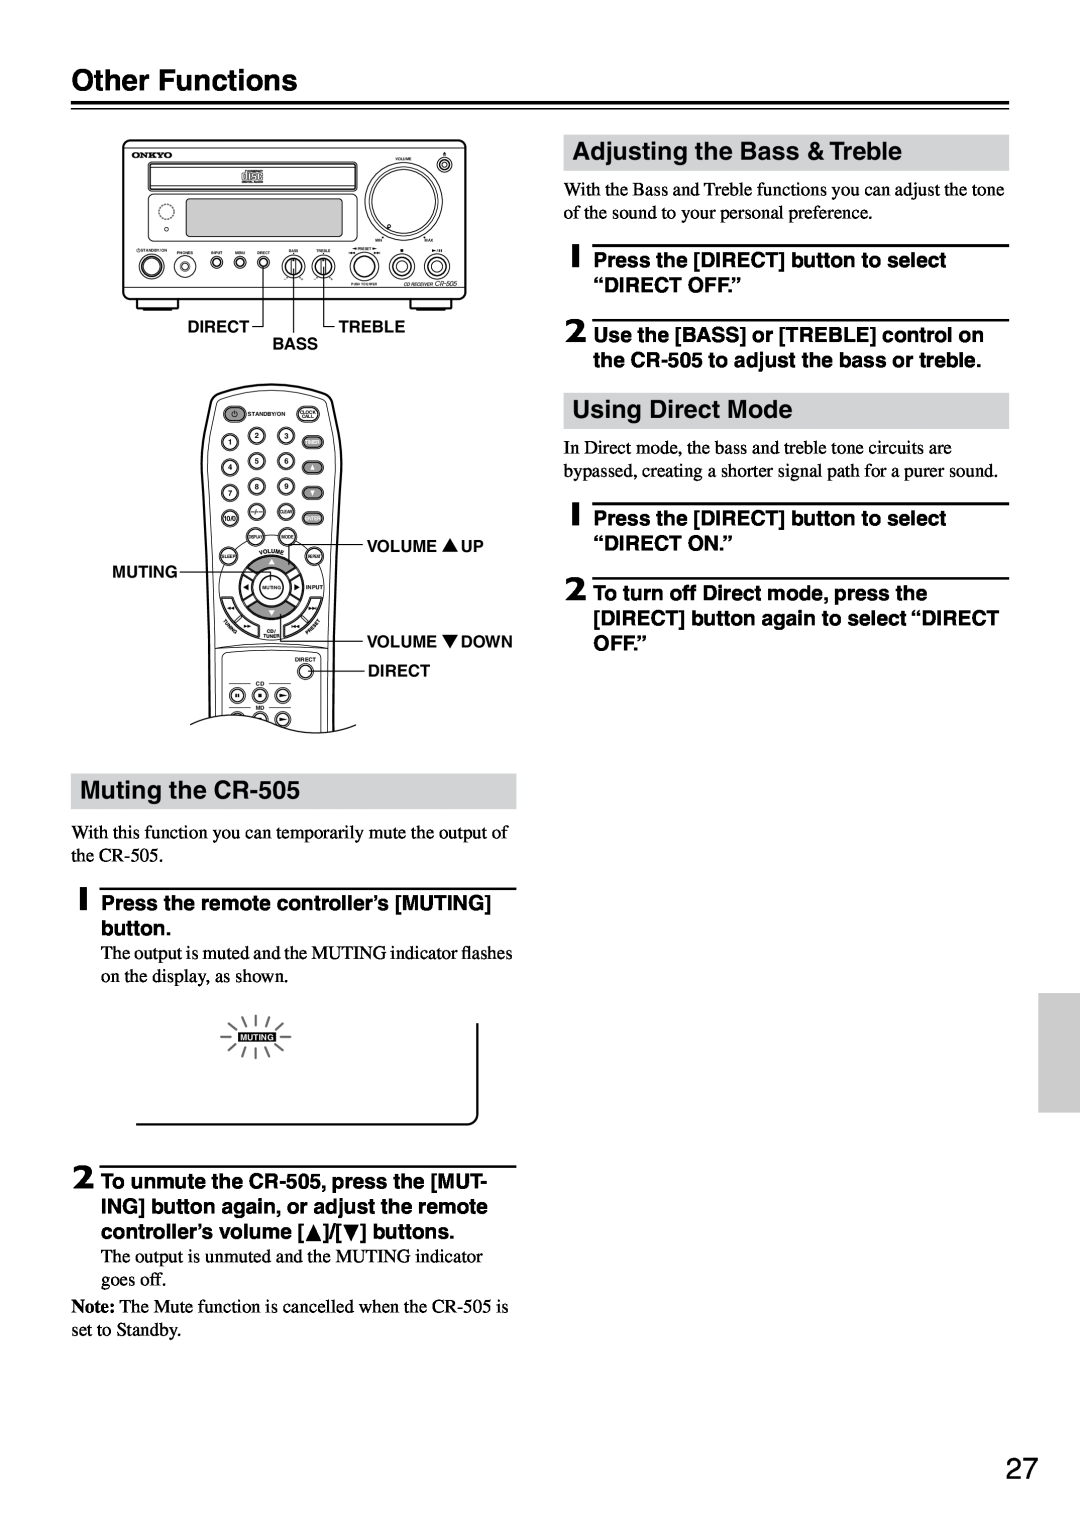 Onkyo instruction manual Other Functions, Muting the CR-505, Adjusting the Bass & Treble, Using Direct Mode 